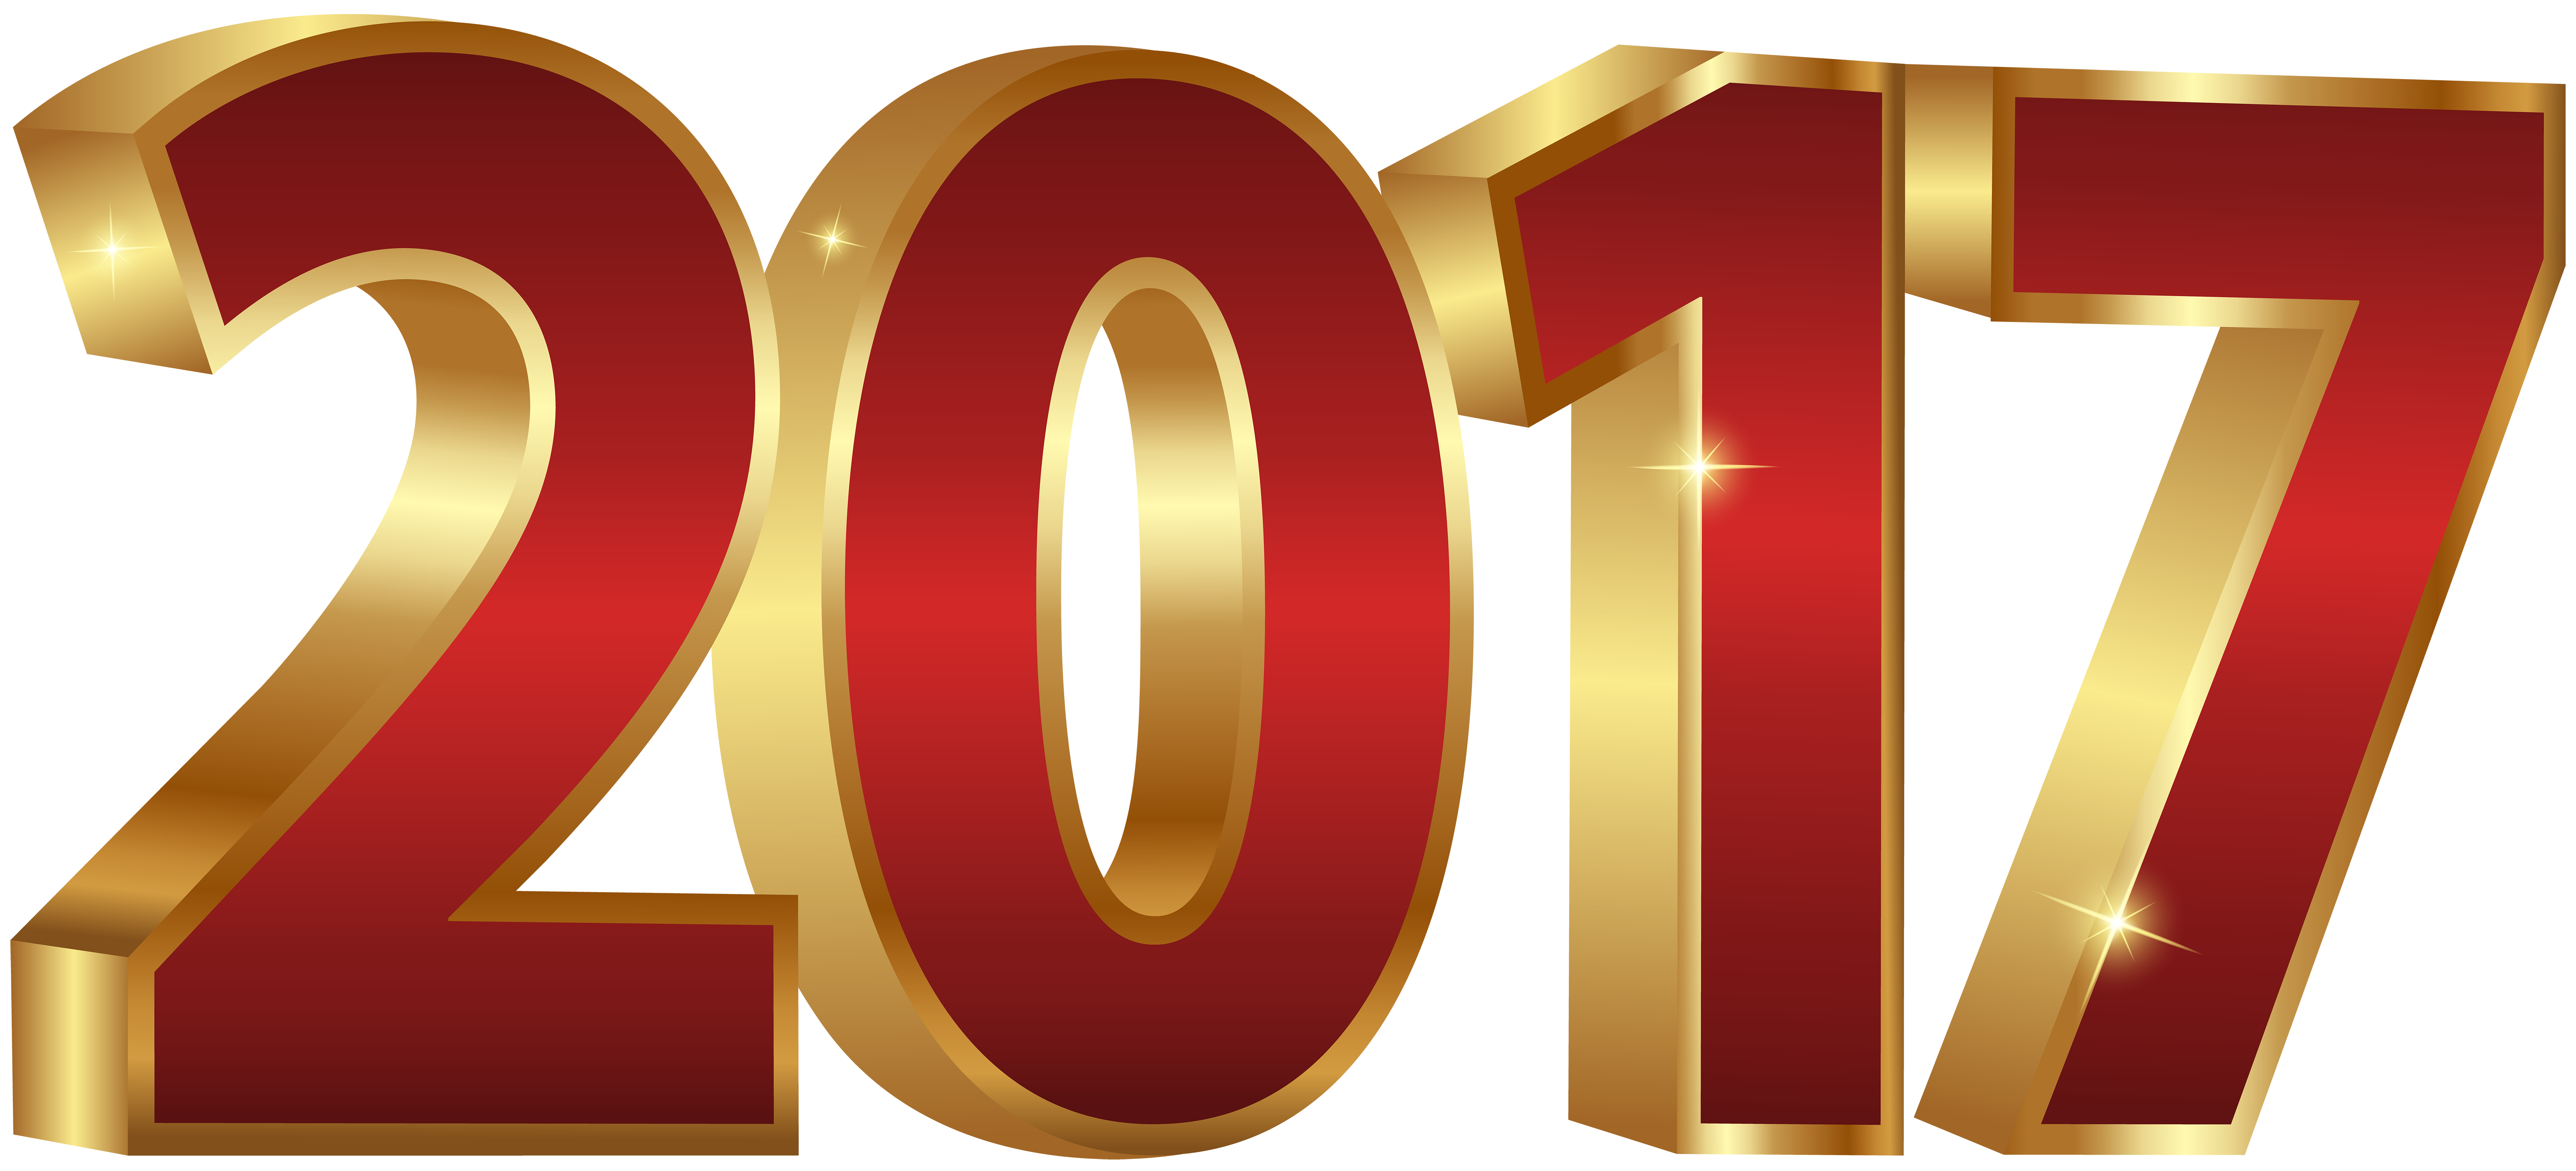 Golden 2017 PNG Clipart Image New Year 2018.